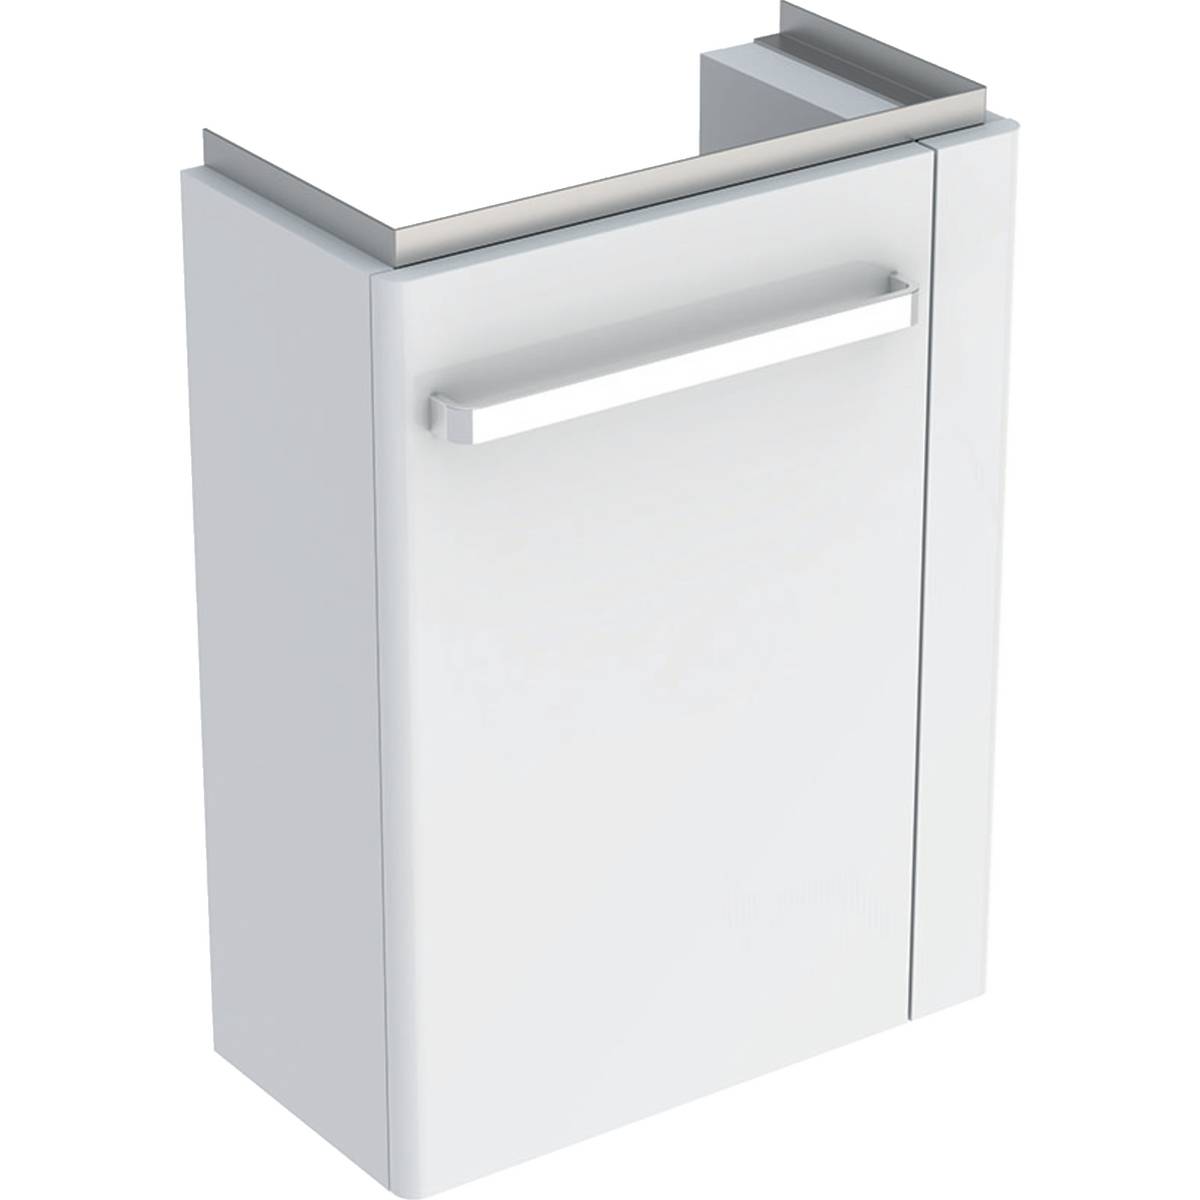 Selnova Compact Cabinet for Handrinse Basin, with Towel Rail, Small Projection